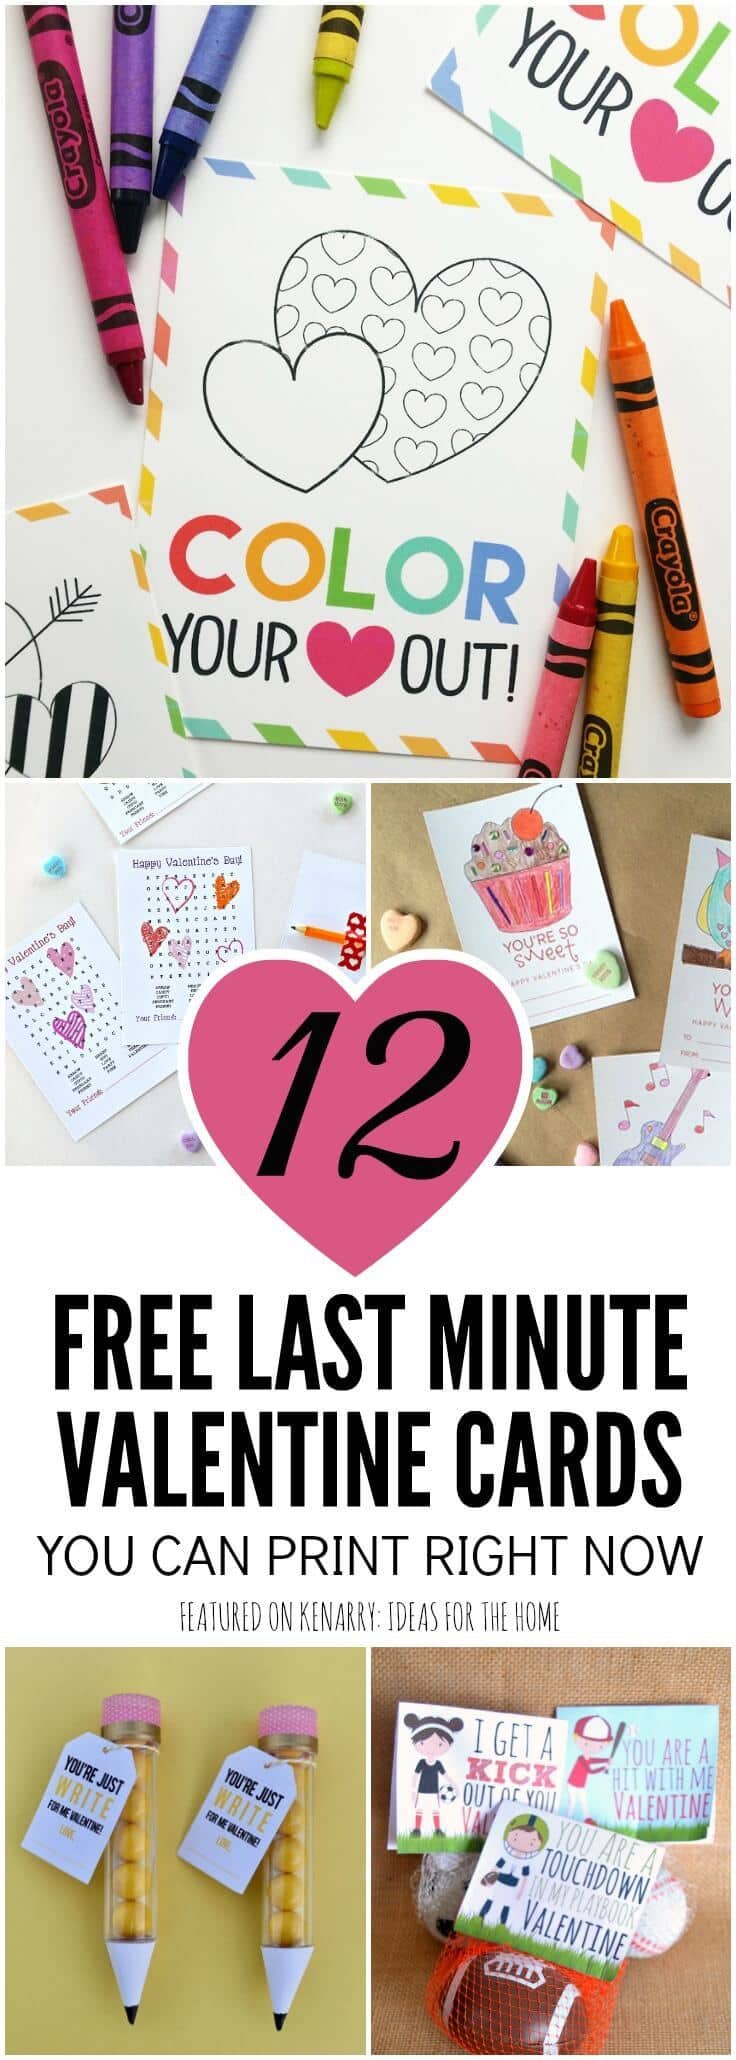 What a lifesaver! These free printable valentines are available to download now if you need to print cards at the last minute for your child to take for the Valentine's Day party at school.